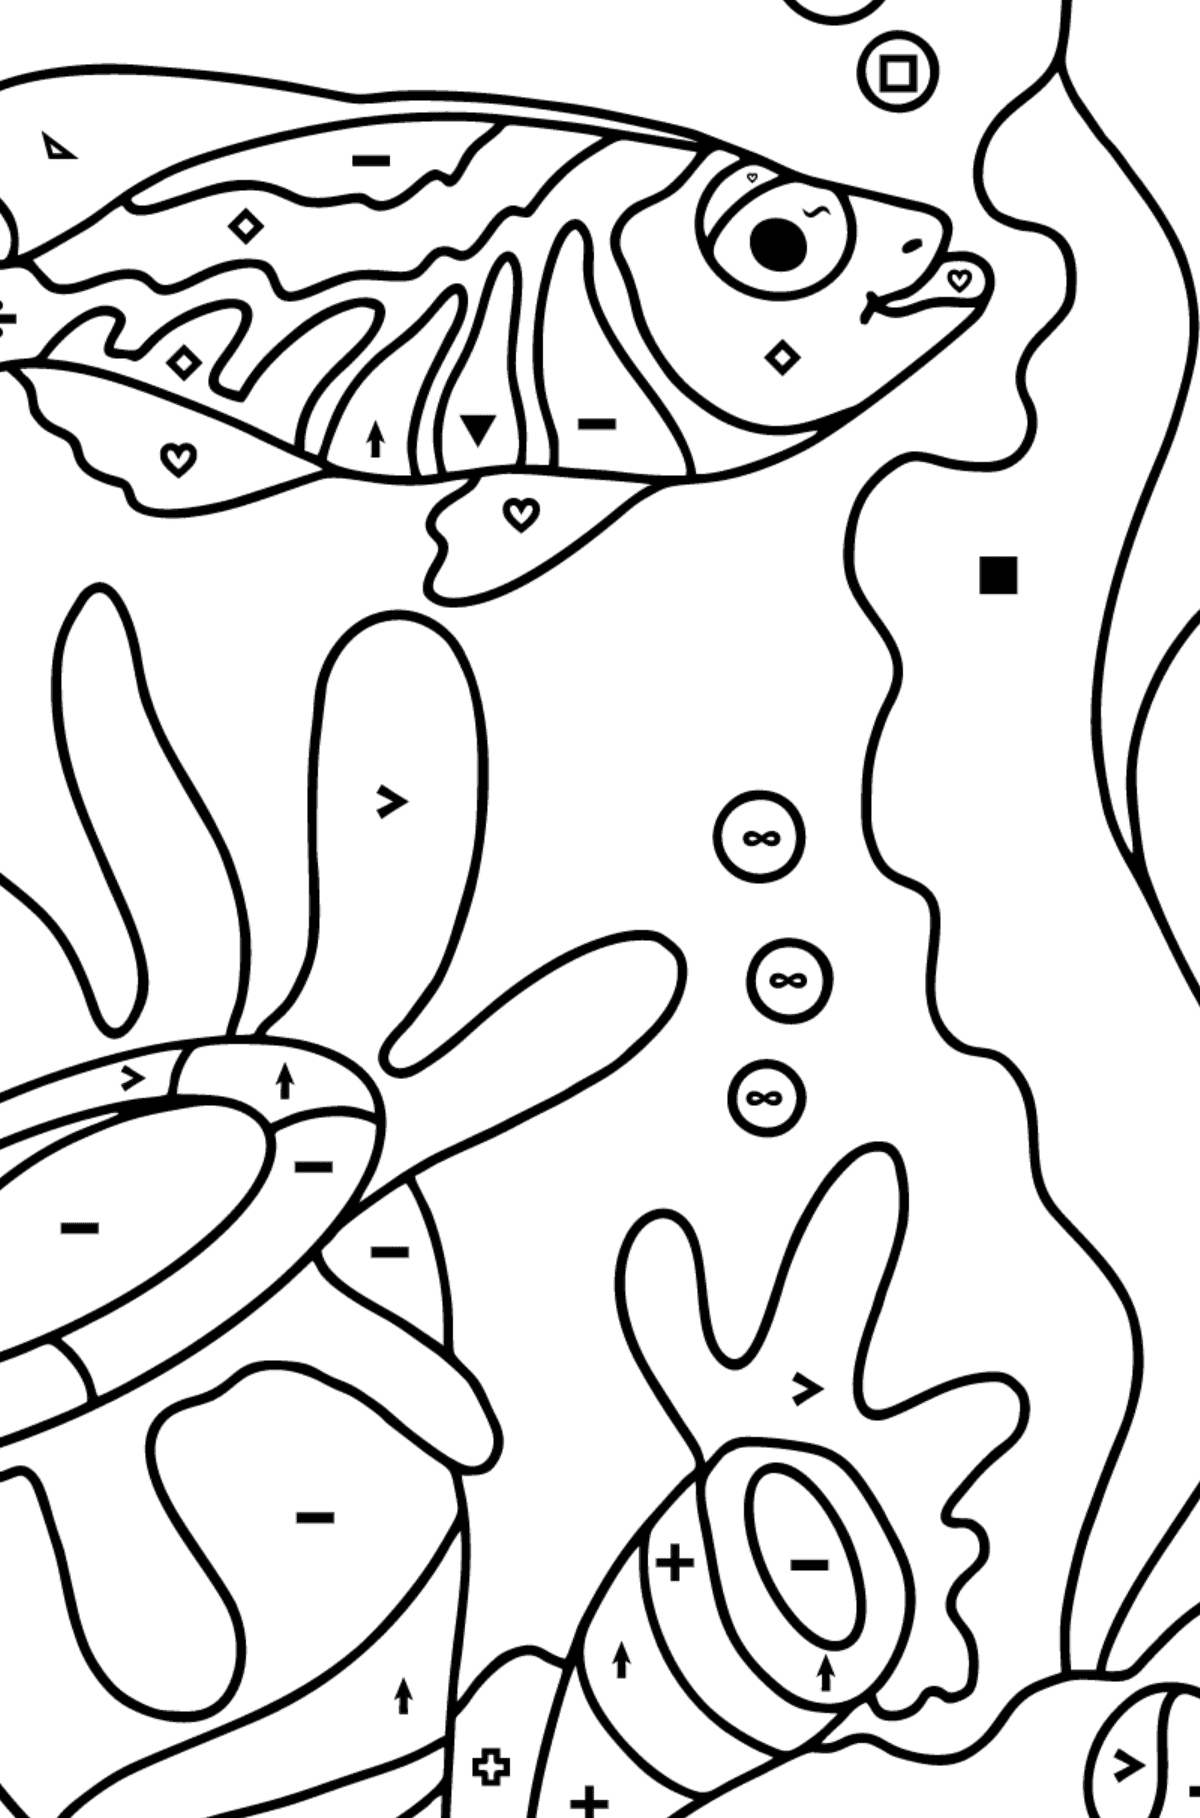 Coloring Page - A Fish is Swimming - Coloring by Symbols and Geometric Shapes for Kids